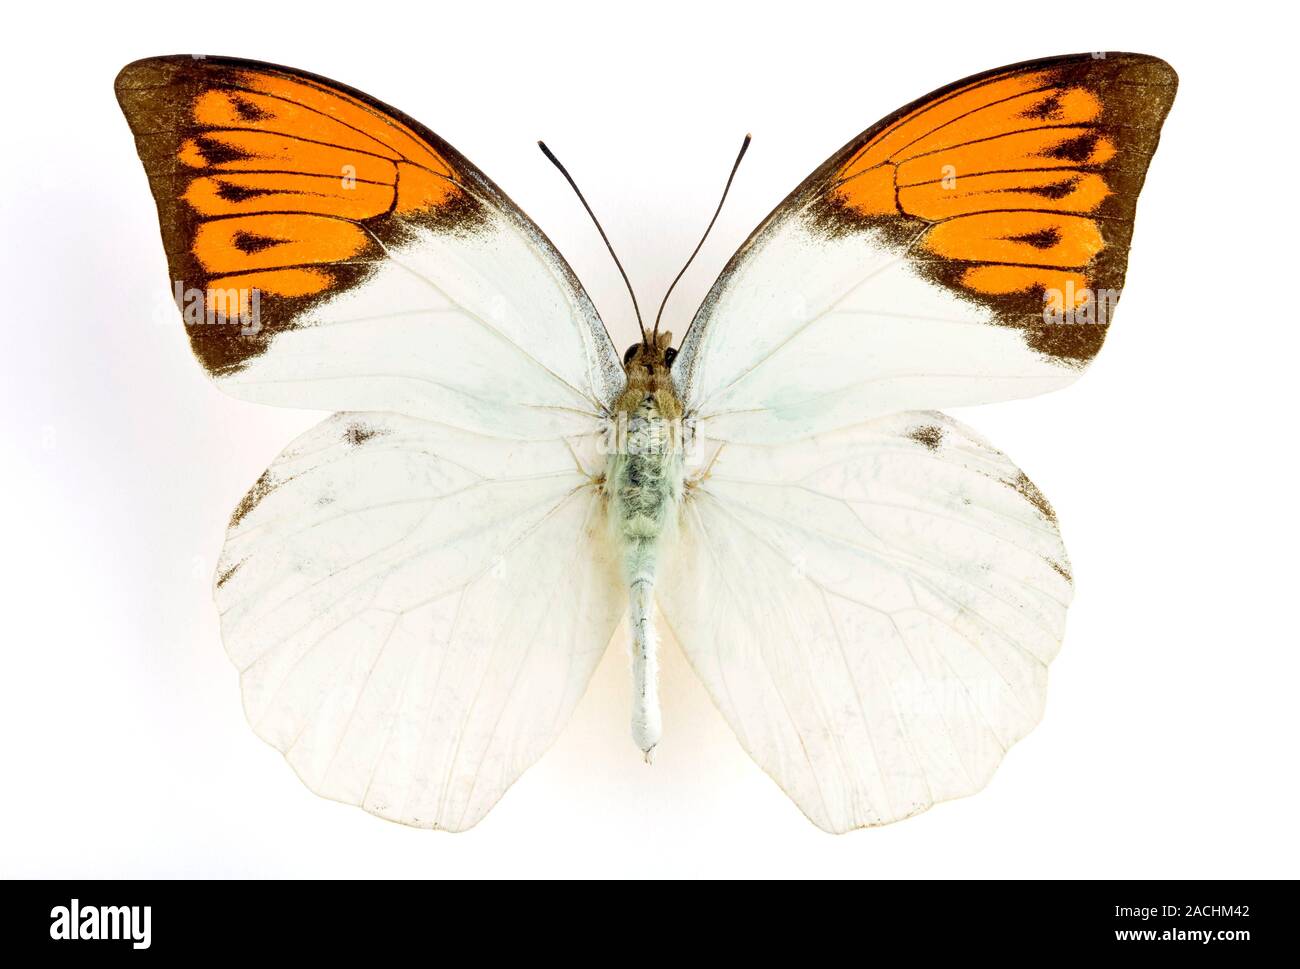 Great orange tip (Hebomoia glaucippe) butterfly with its wings spread. This species is native to Sulawesi, Indonesia. Stock Photo